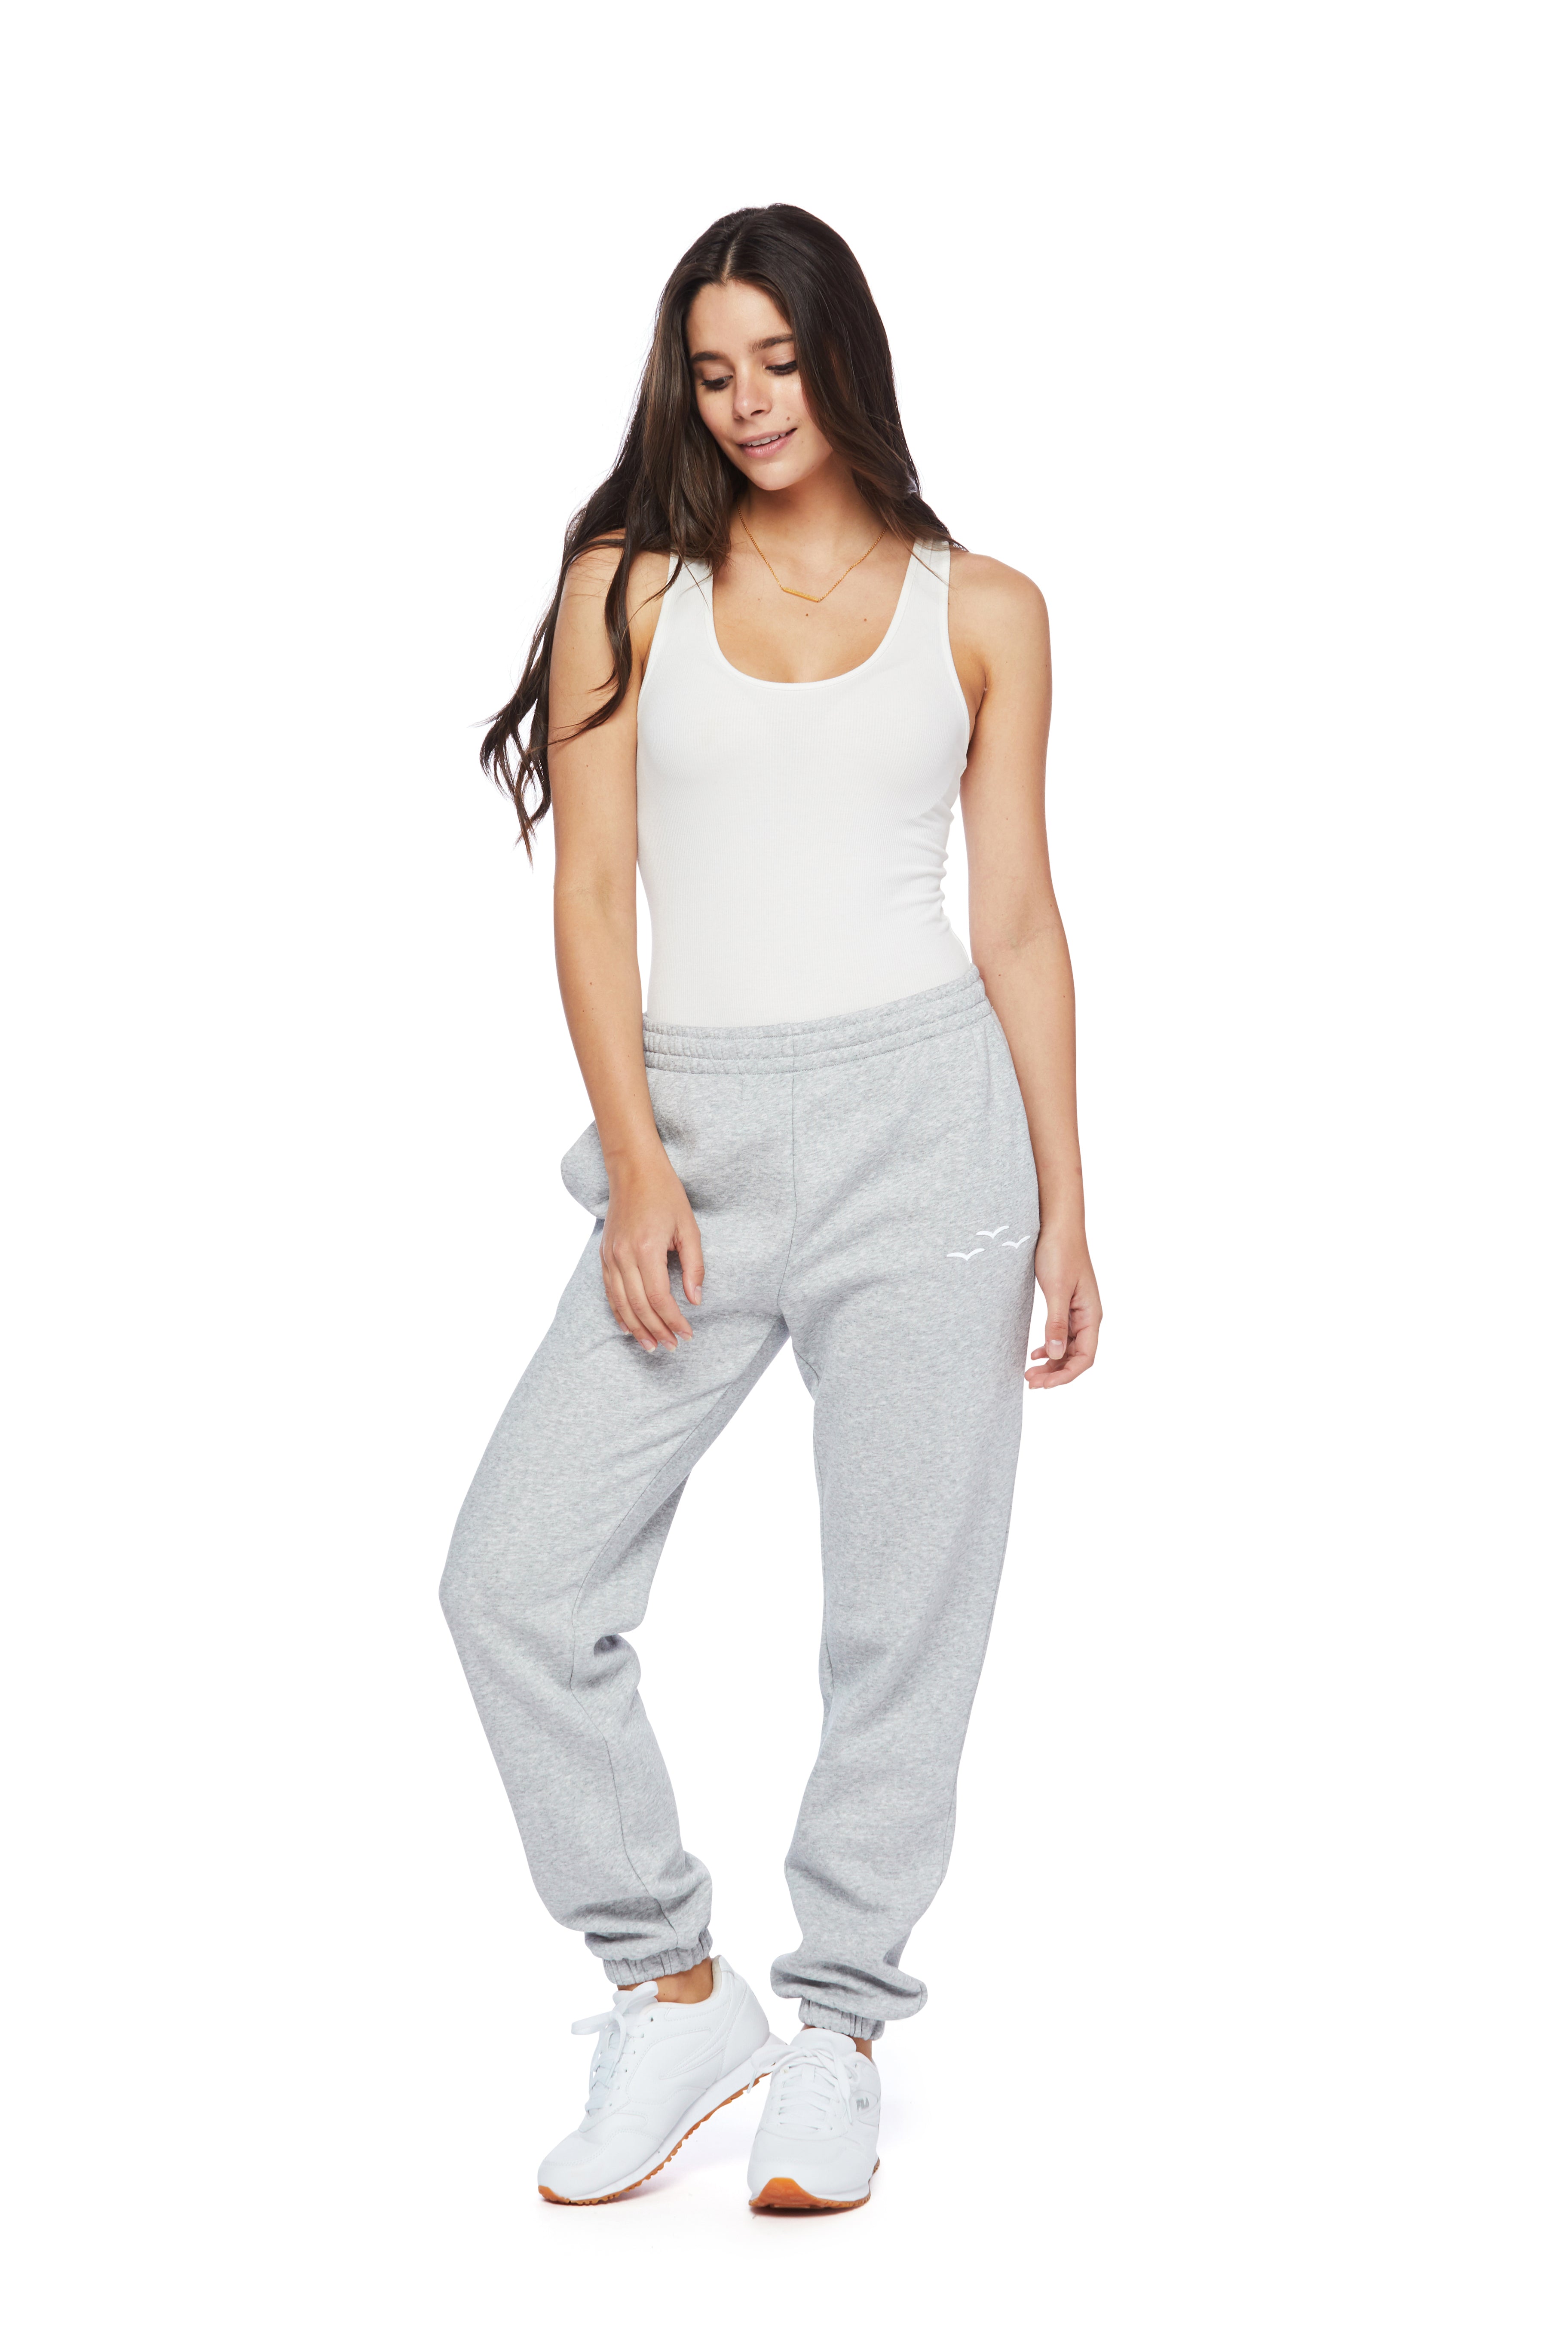 Women's Joggers - Relaxed Fit, Coming Soon